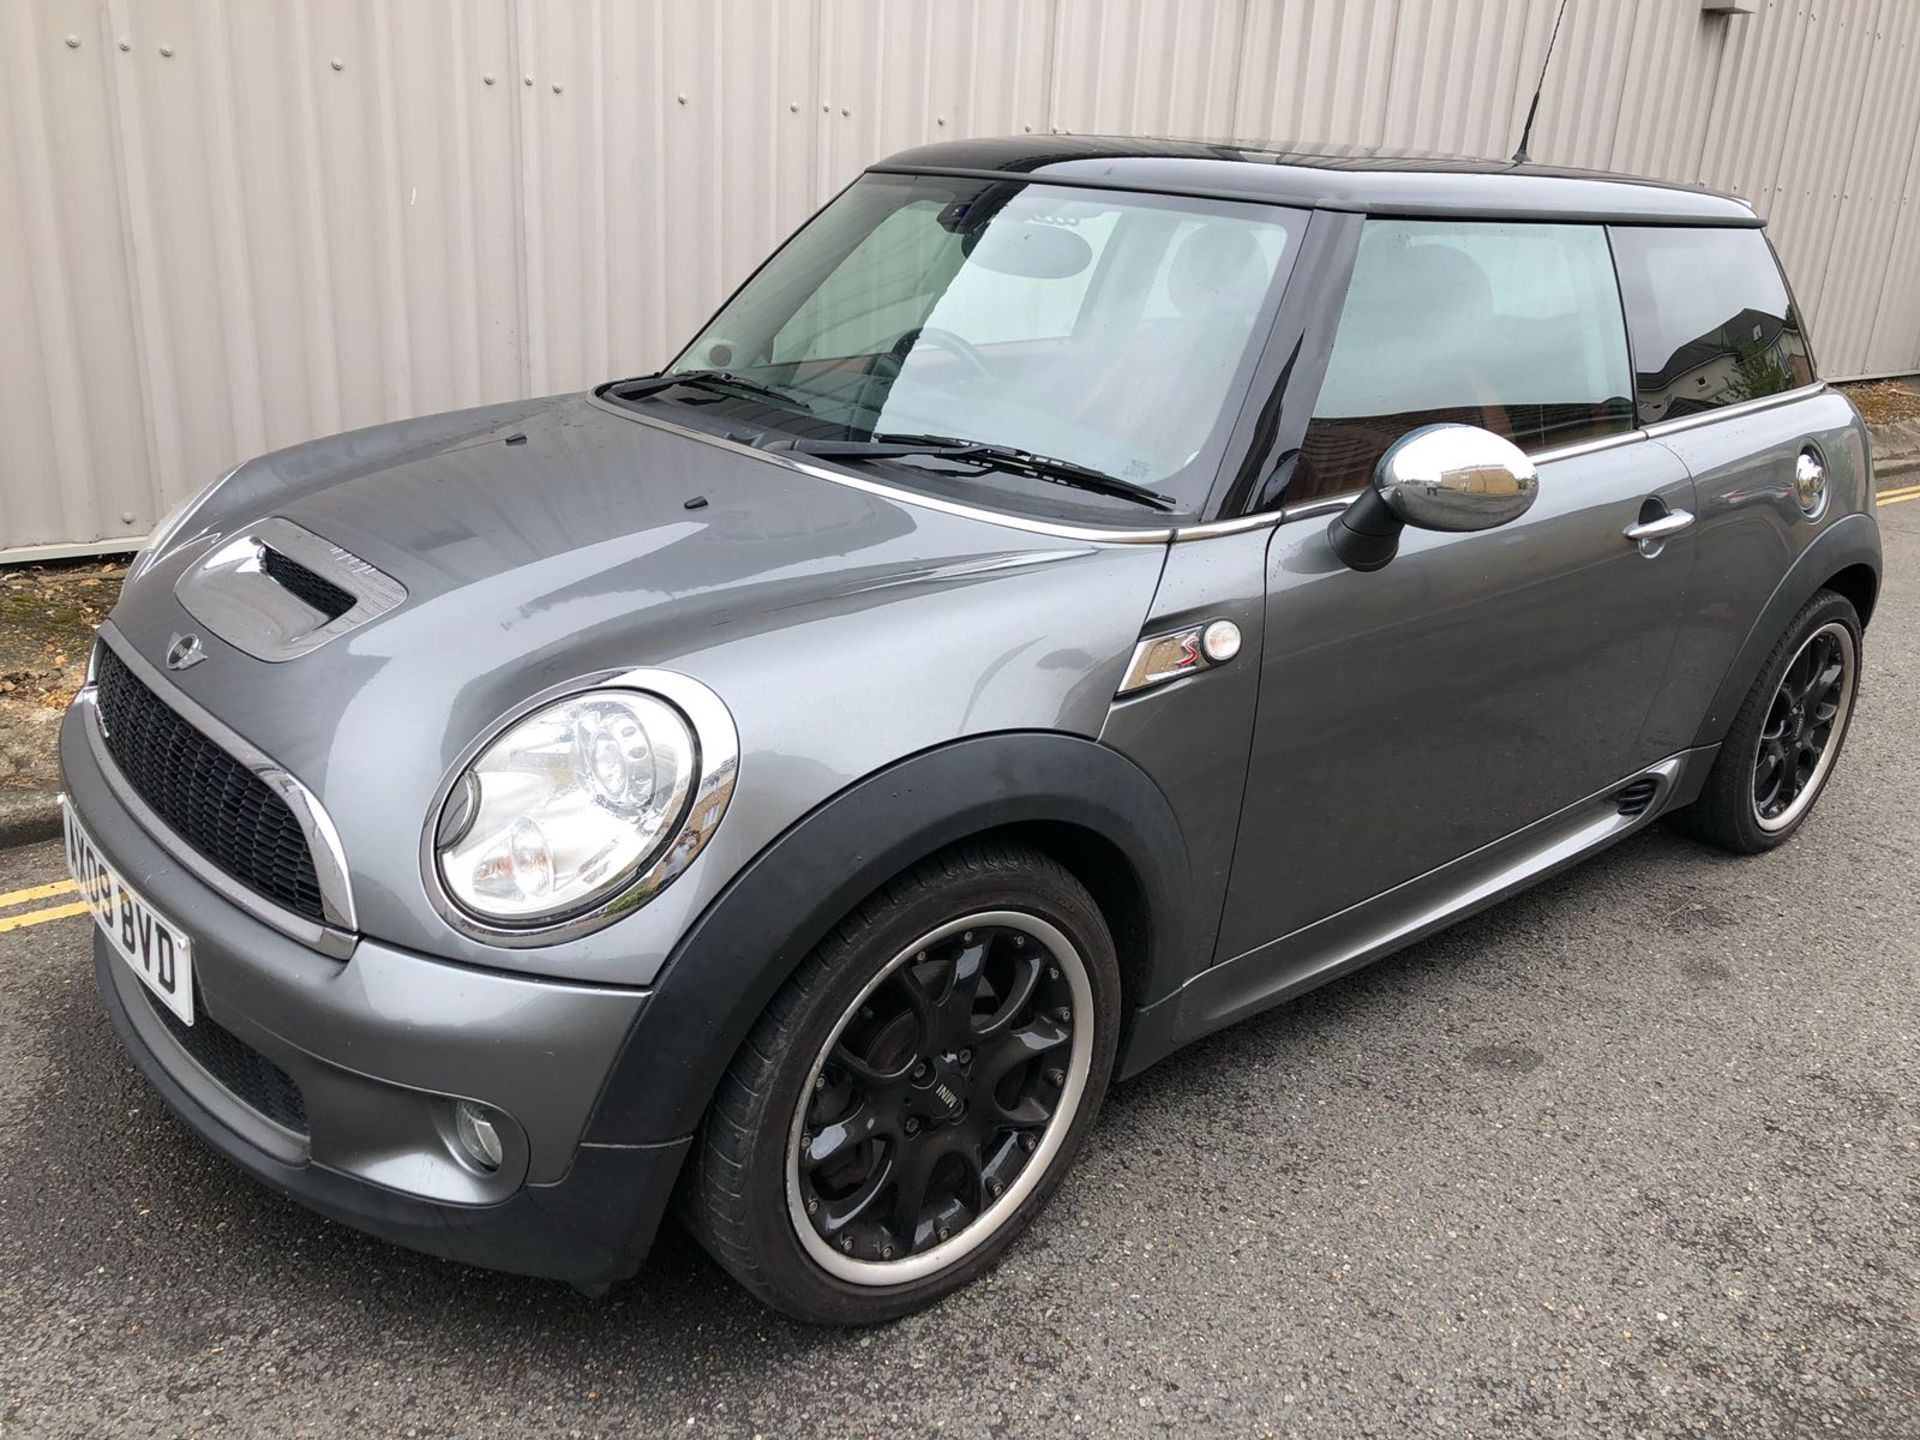 MINI COOPER S JOHN WORKS. 2009/09. 79,000 miles. Full history with 9 stamps in the book. - Image 11 of 19